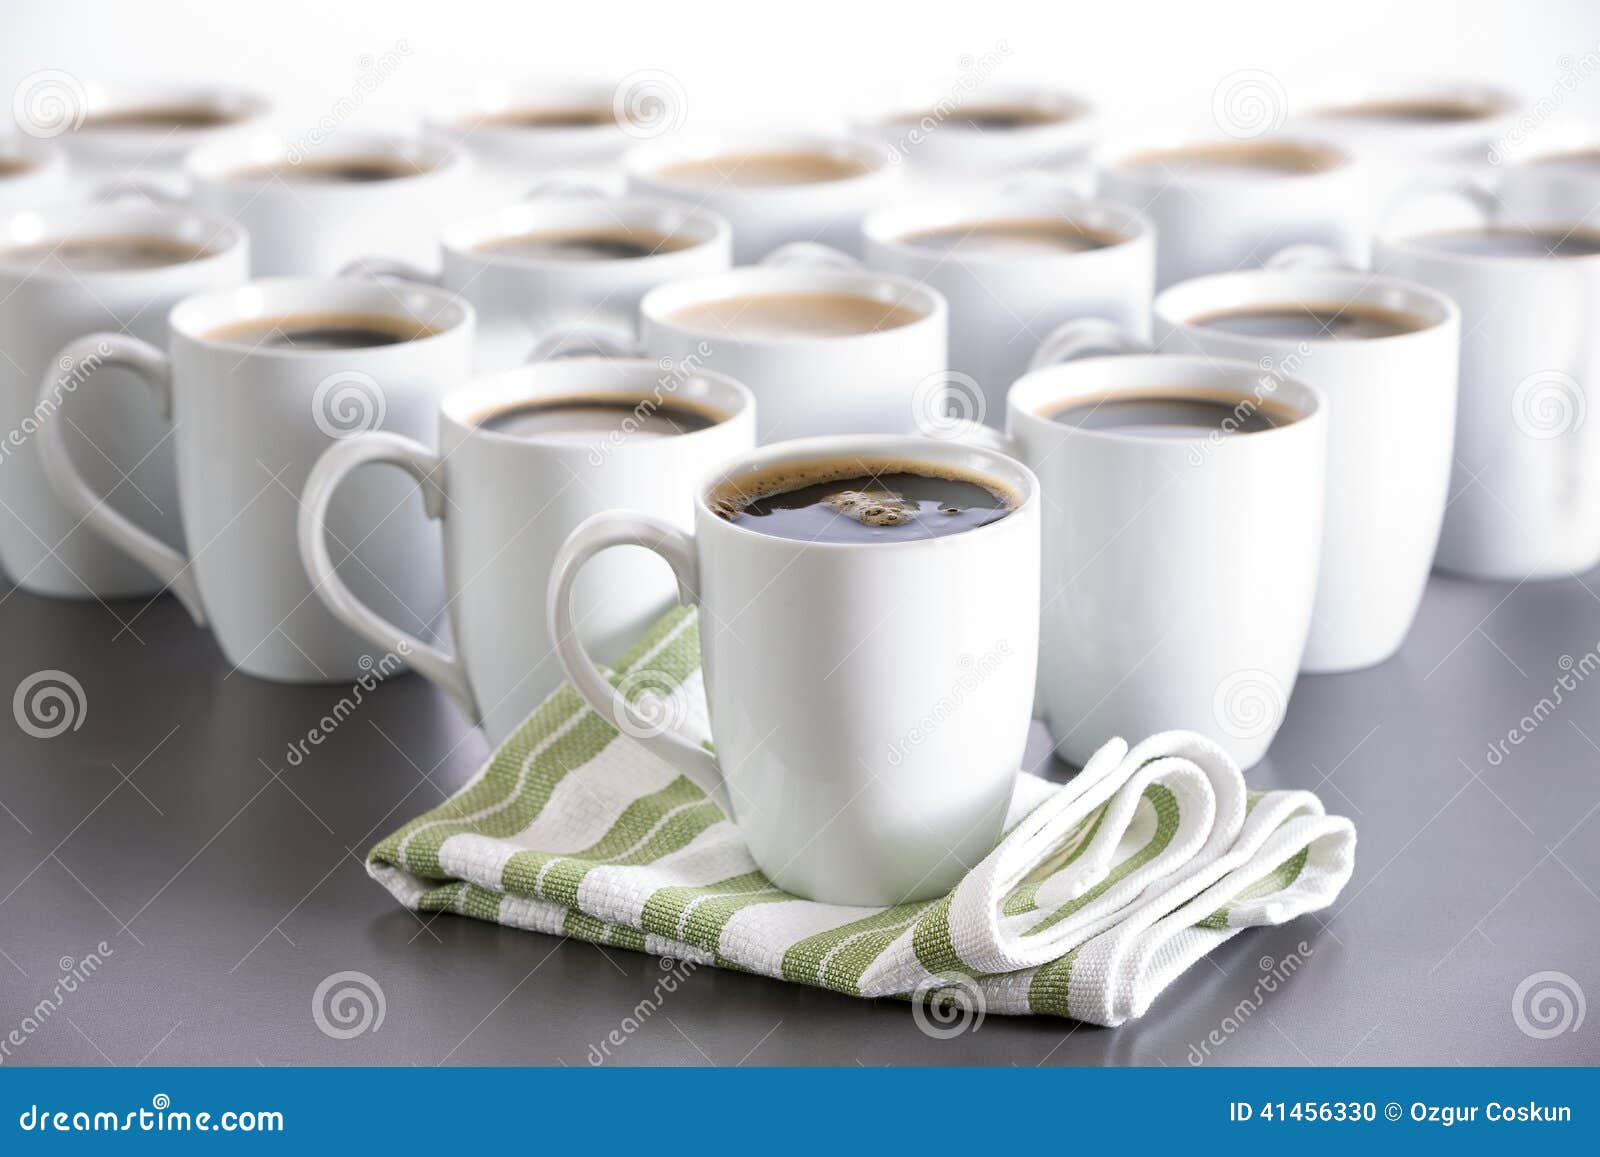 coffee for everyone in the office, bistro coffee cups in order